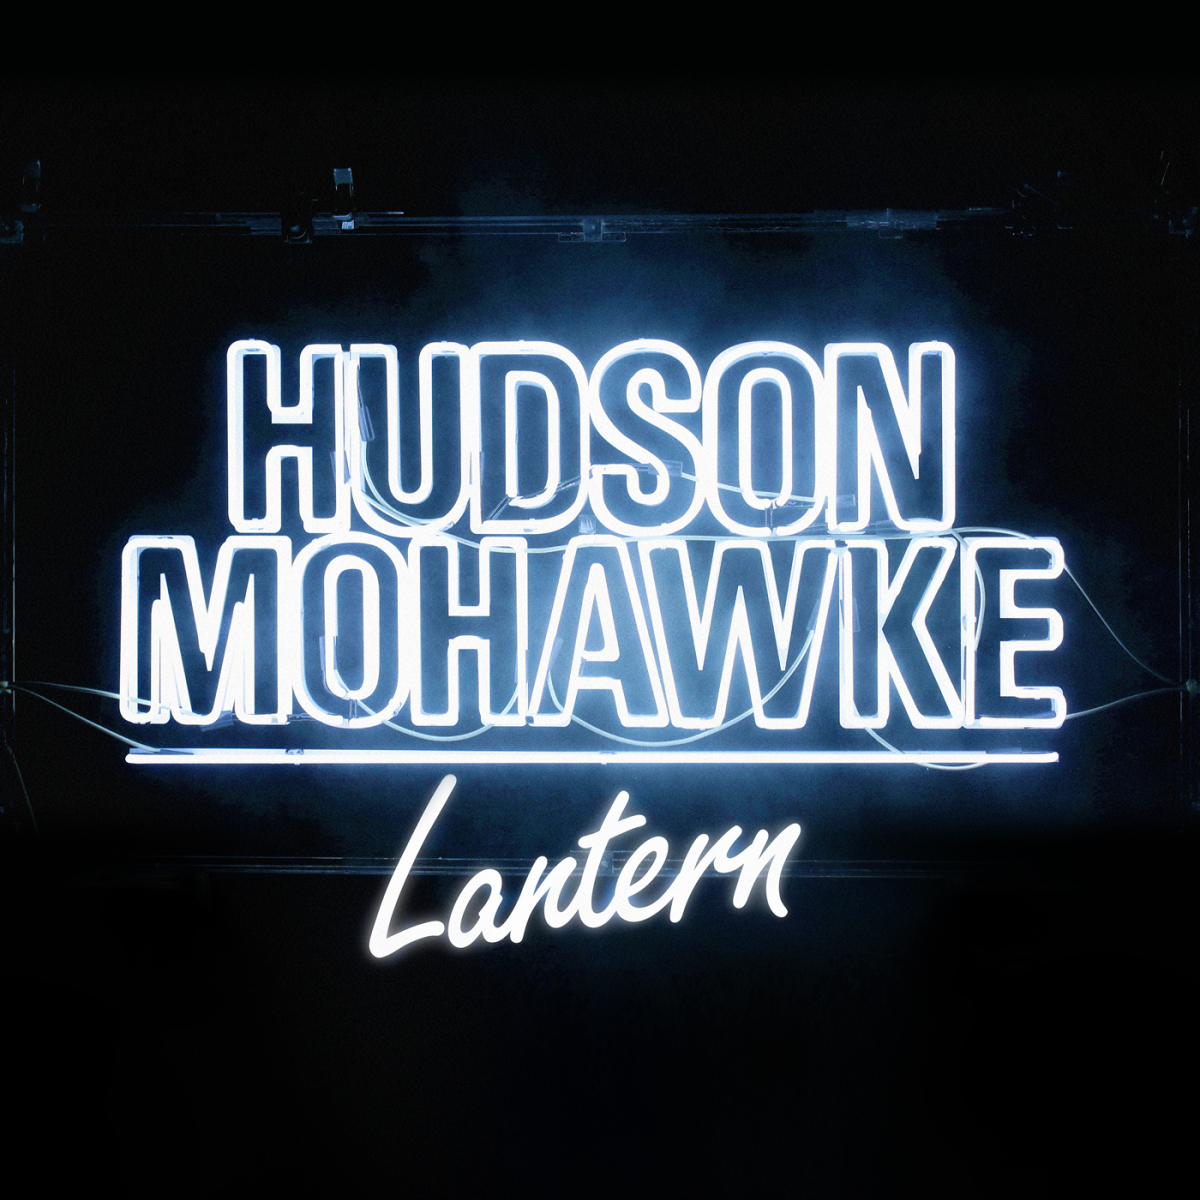 Review of Hudson Mohawke's new LP 'Lantern,' the album will be available June 16th via Warp Records.